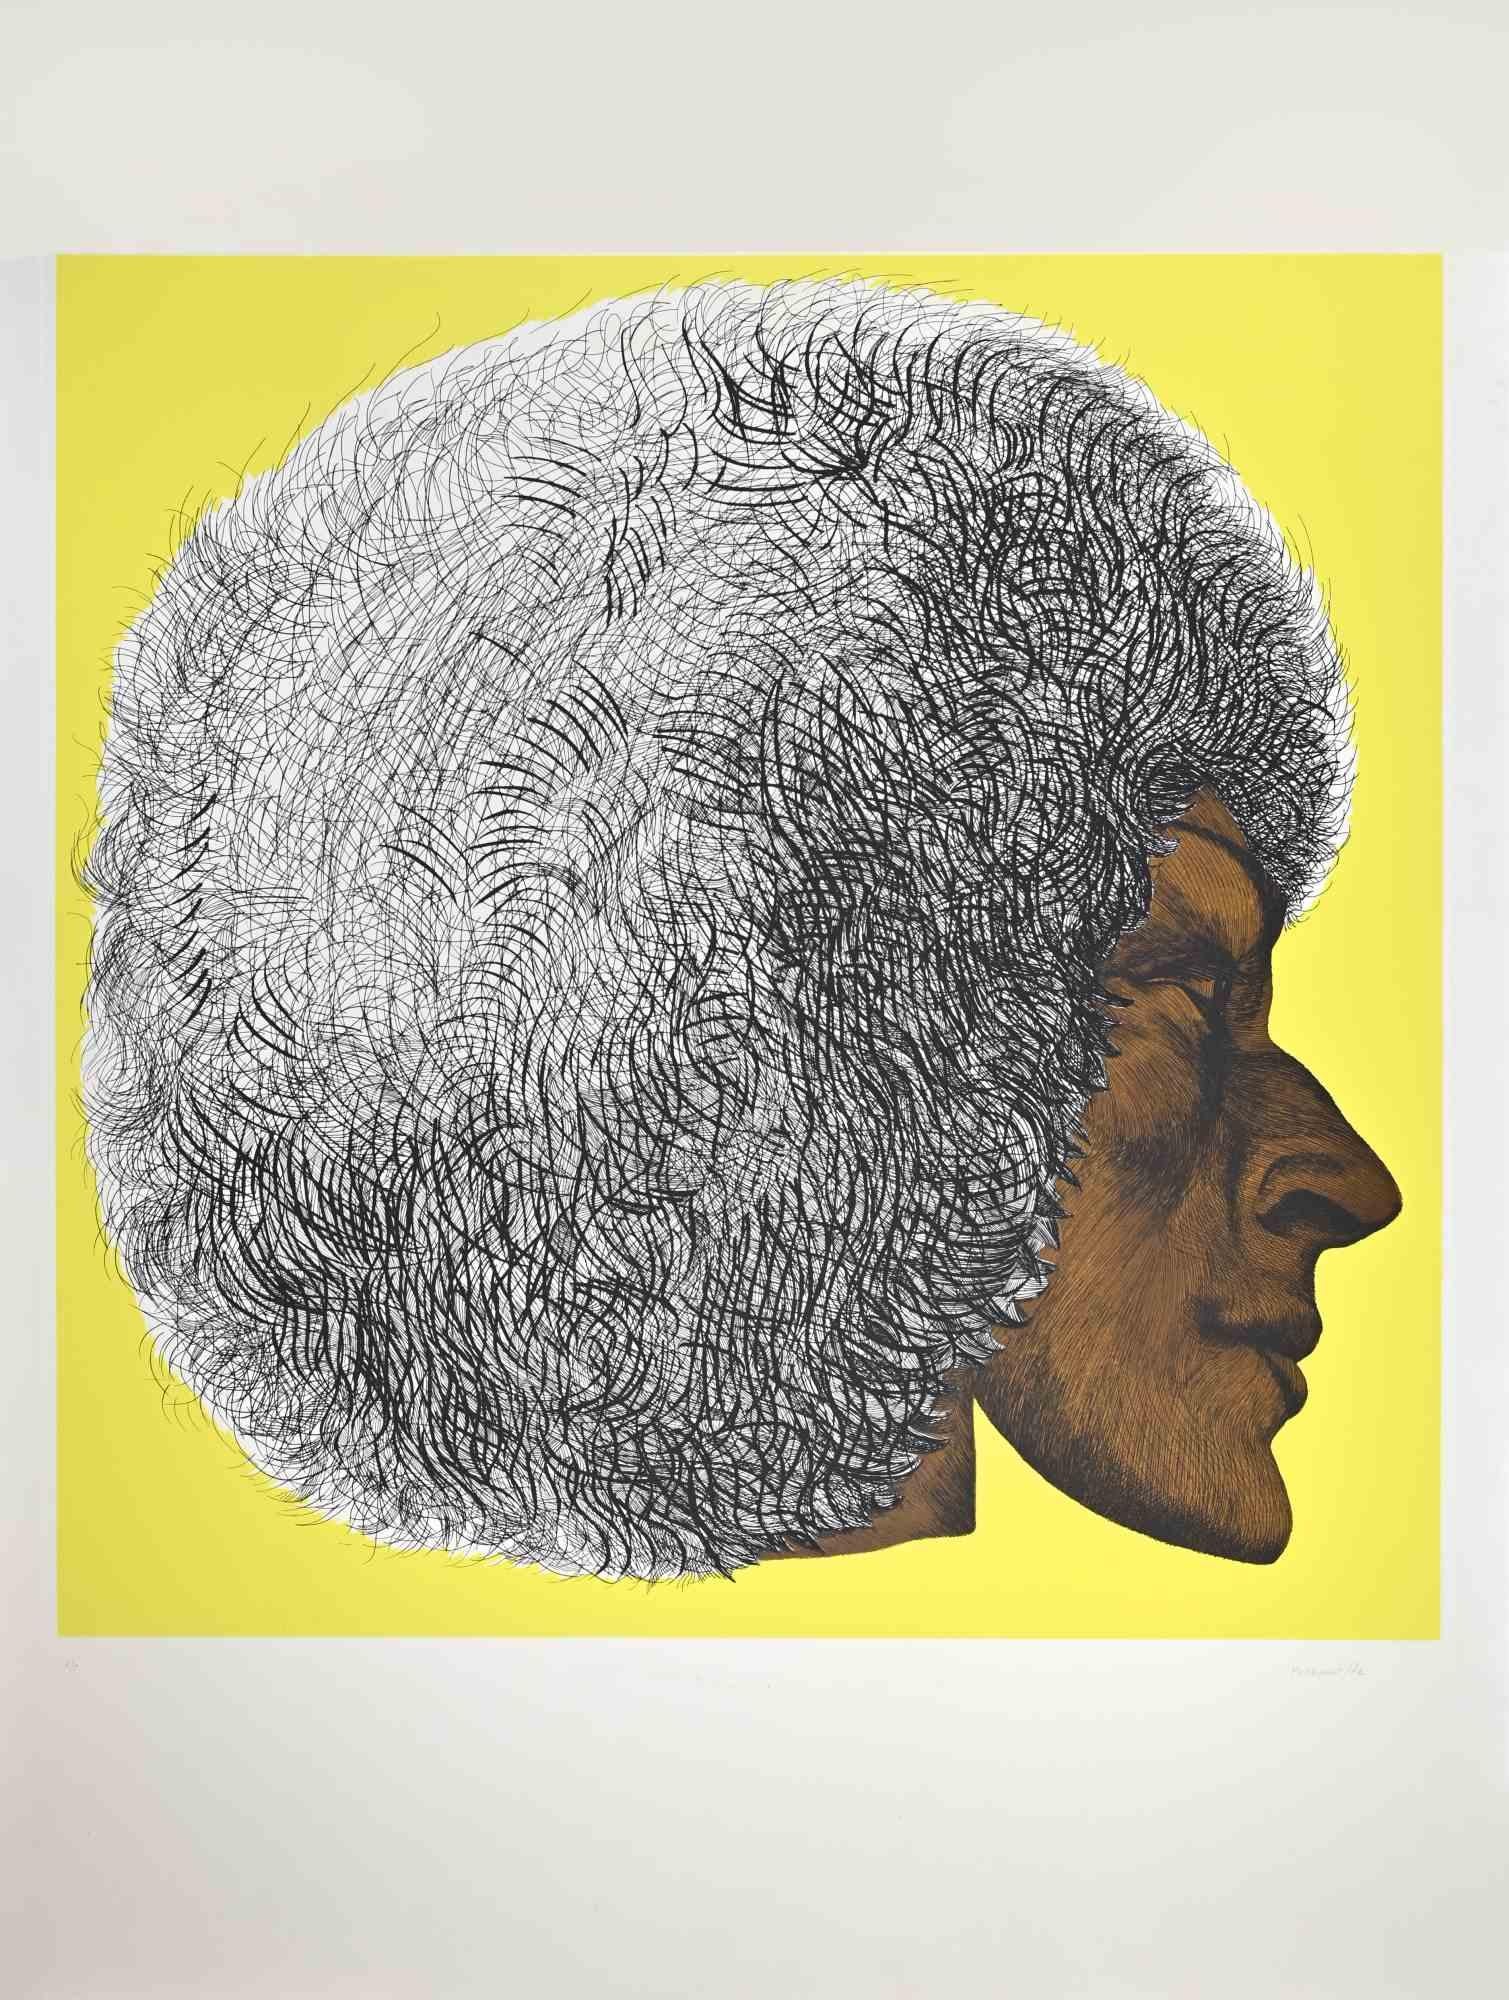 Profile Yellow II - Profilo Giallo II is a contemporary artwork realized by Giacomo Porzano in 1972.

Hand signed and dated by artist with pencil.

Numbered on the lower margin. Edition of 5/5.